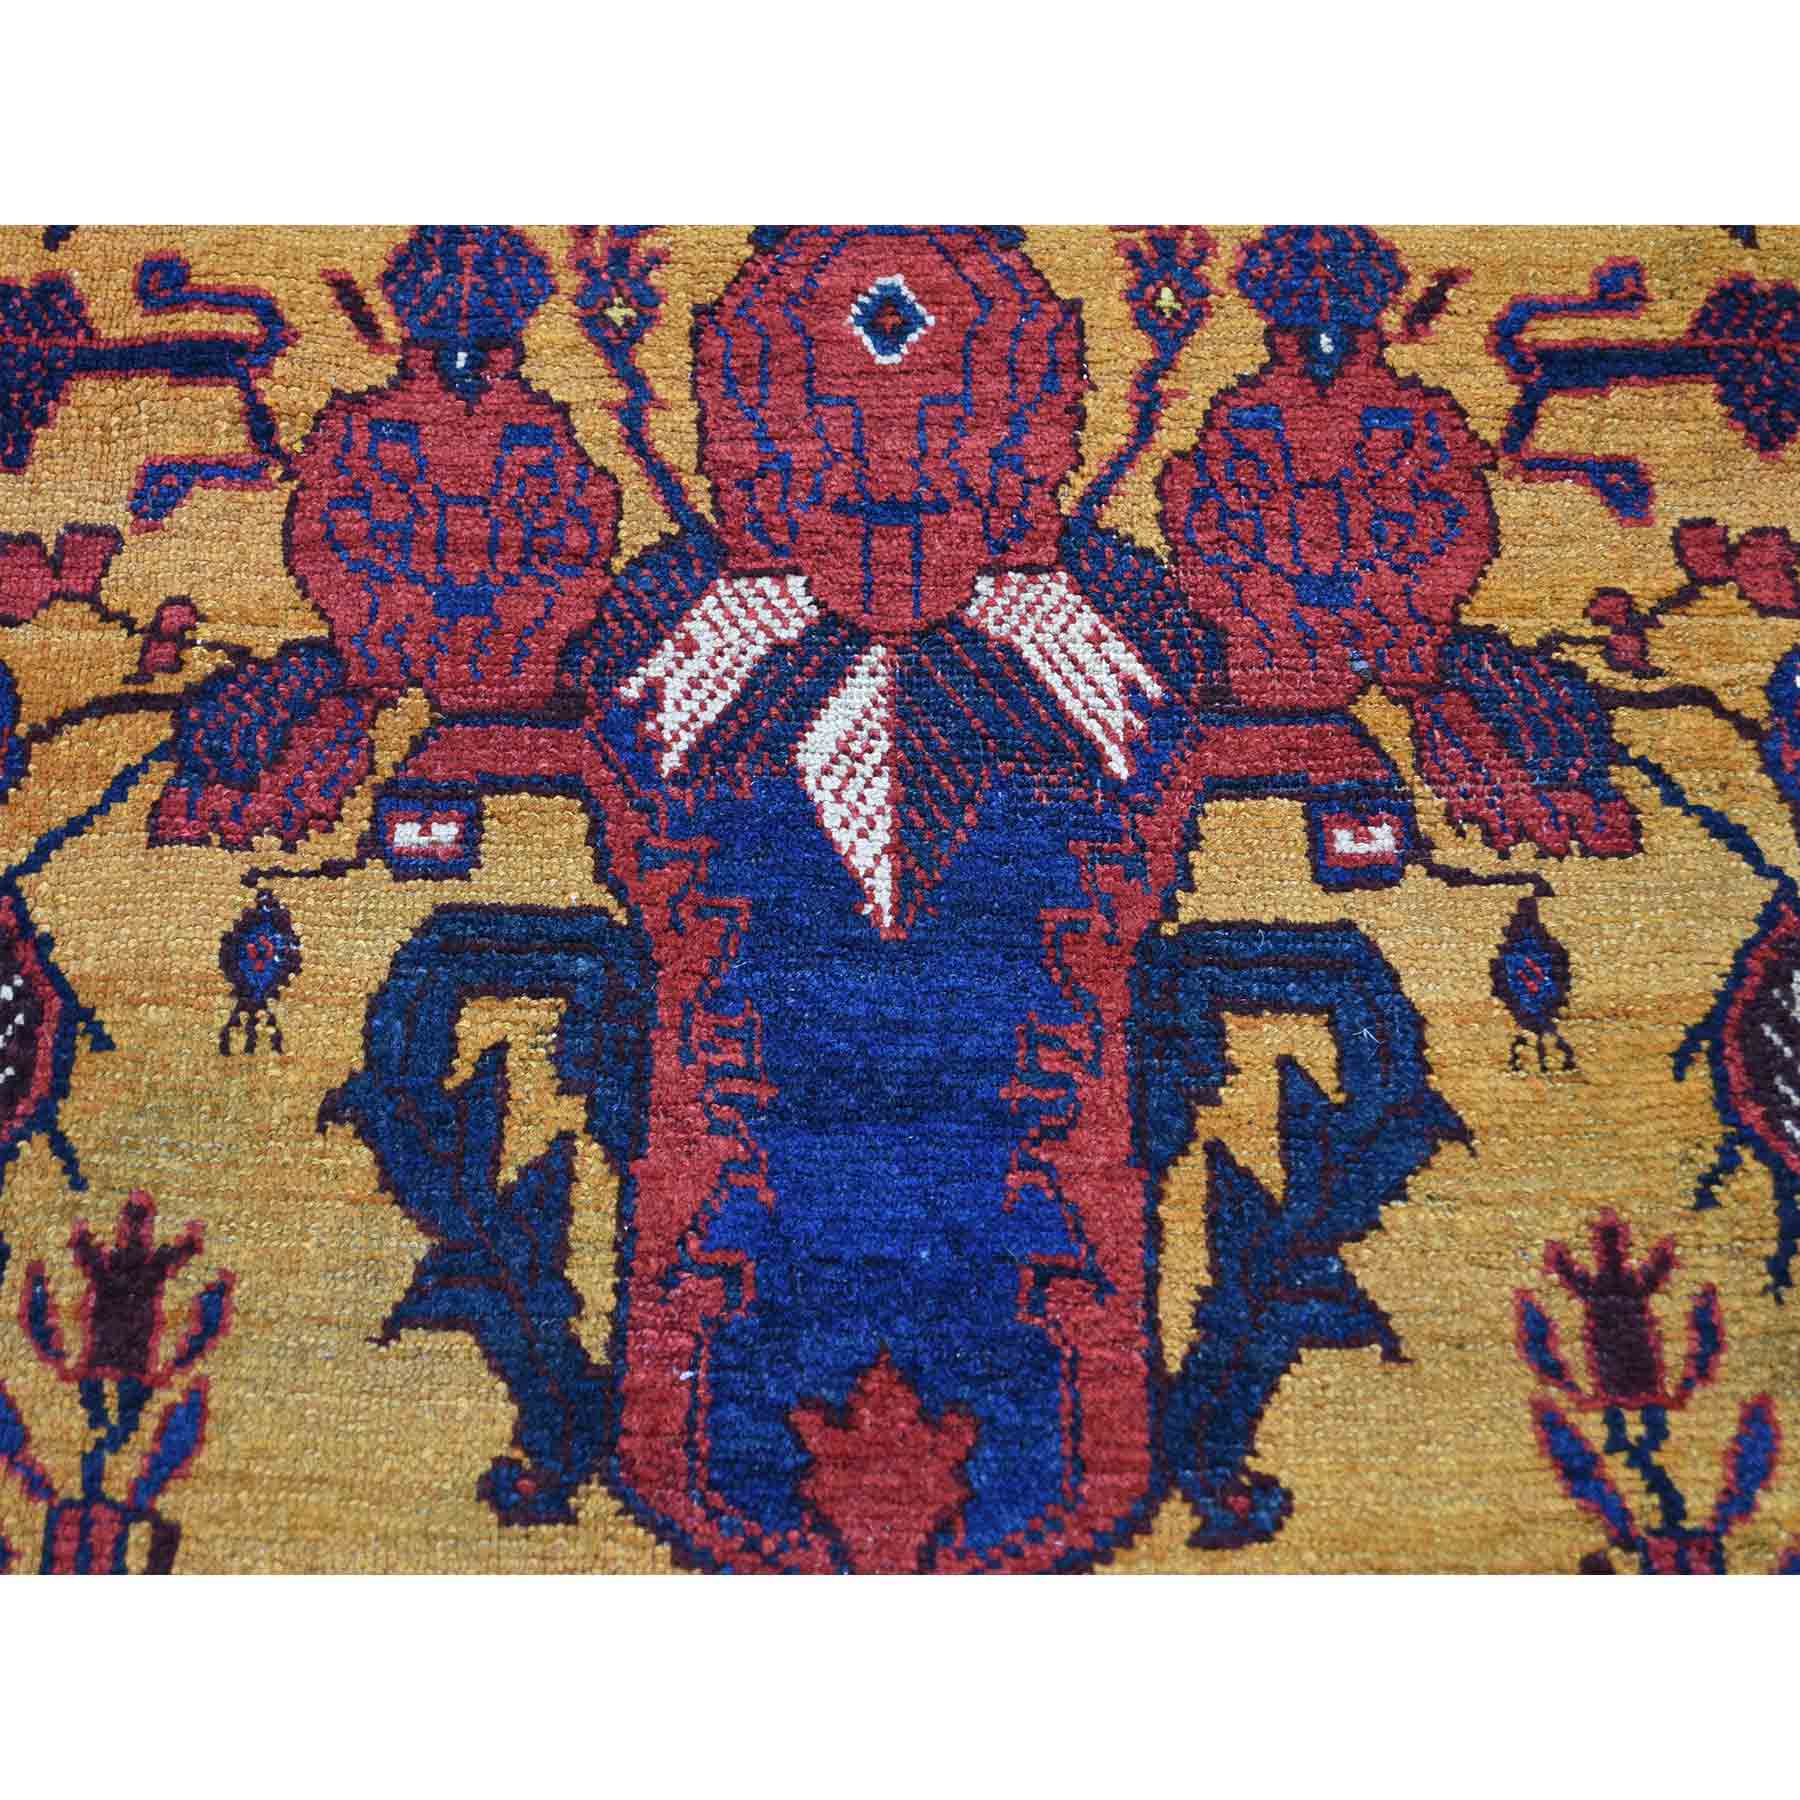 Antique-Hand-Knotted-Rug-224360